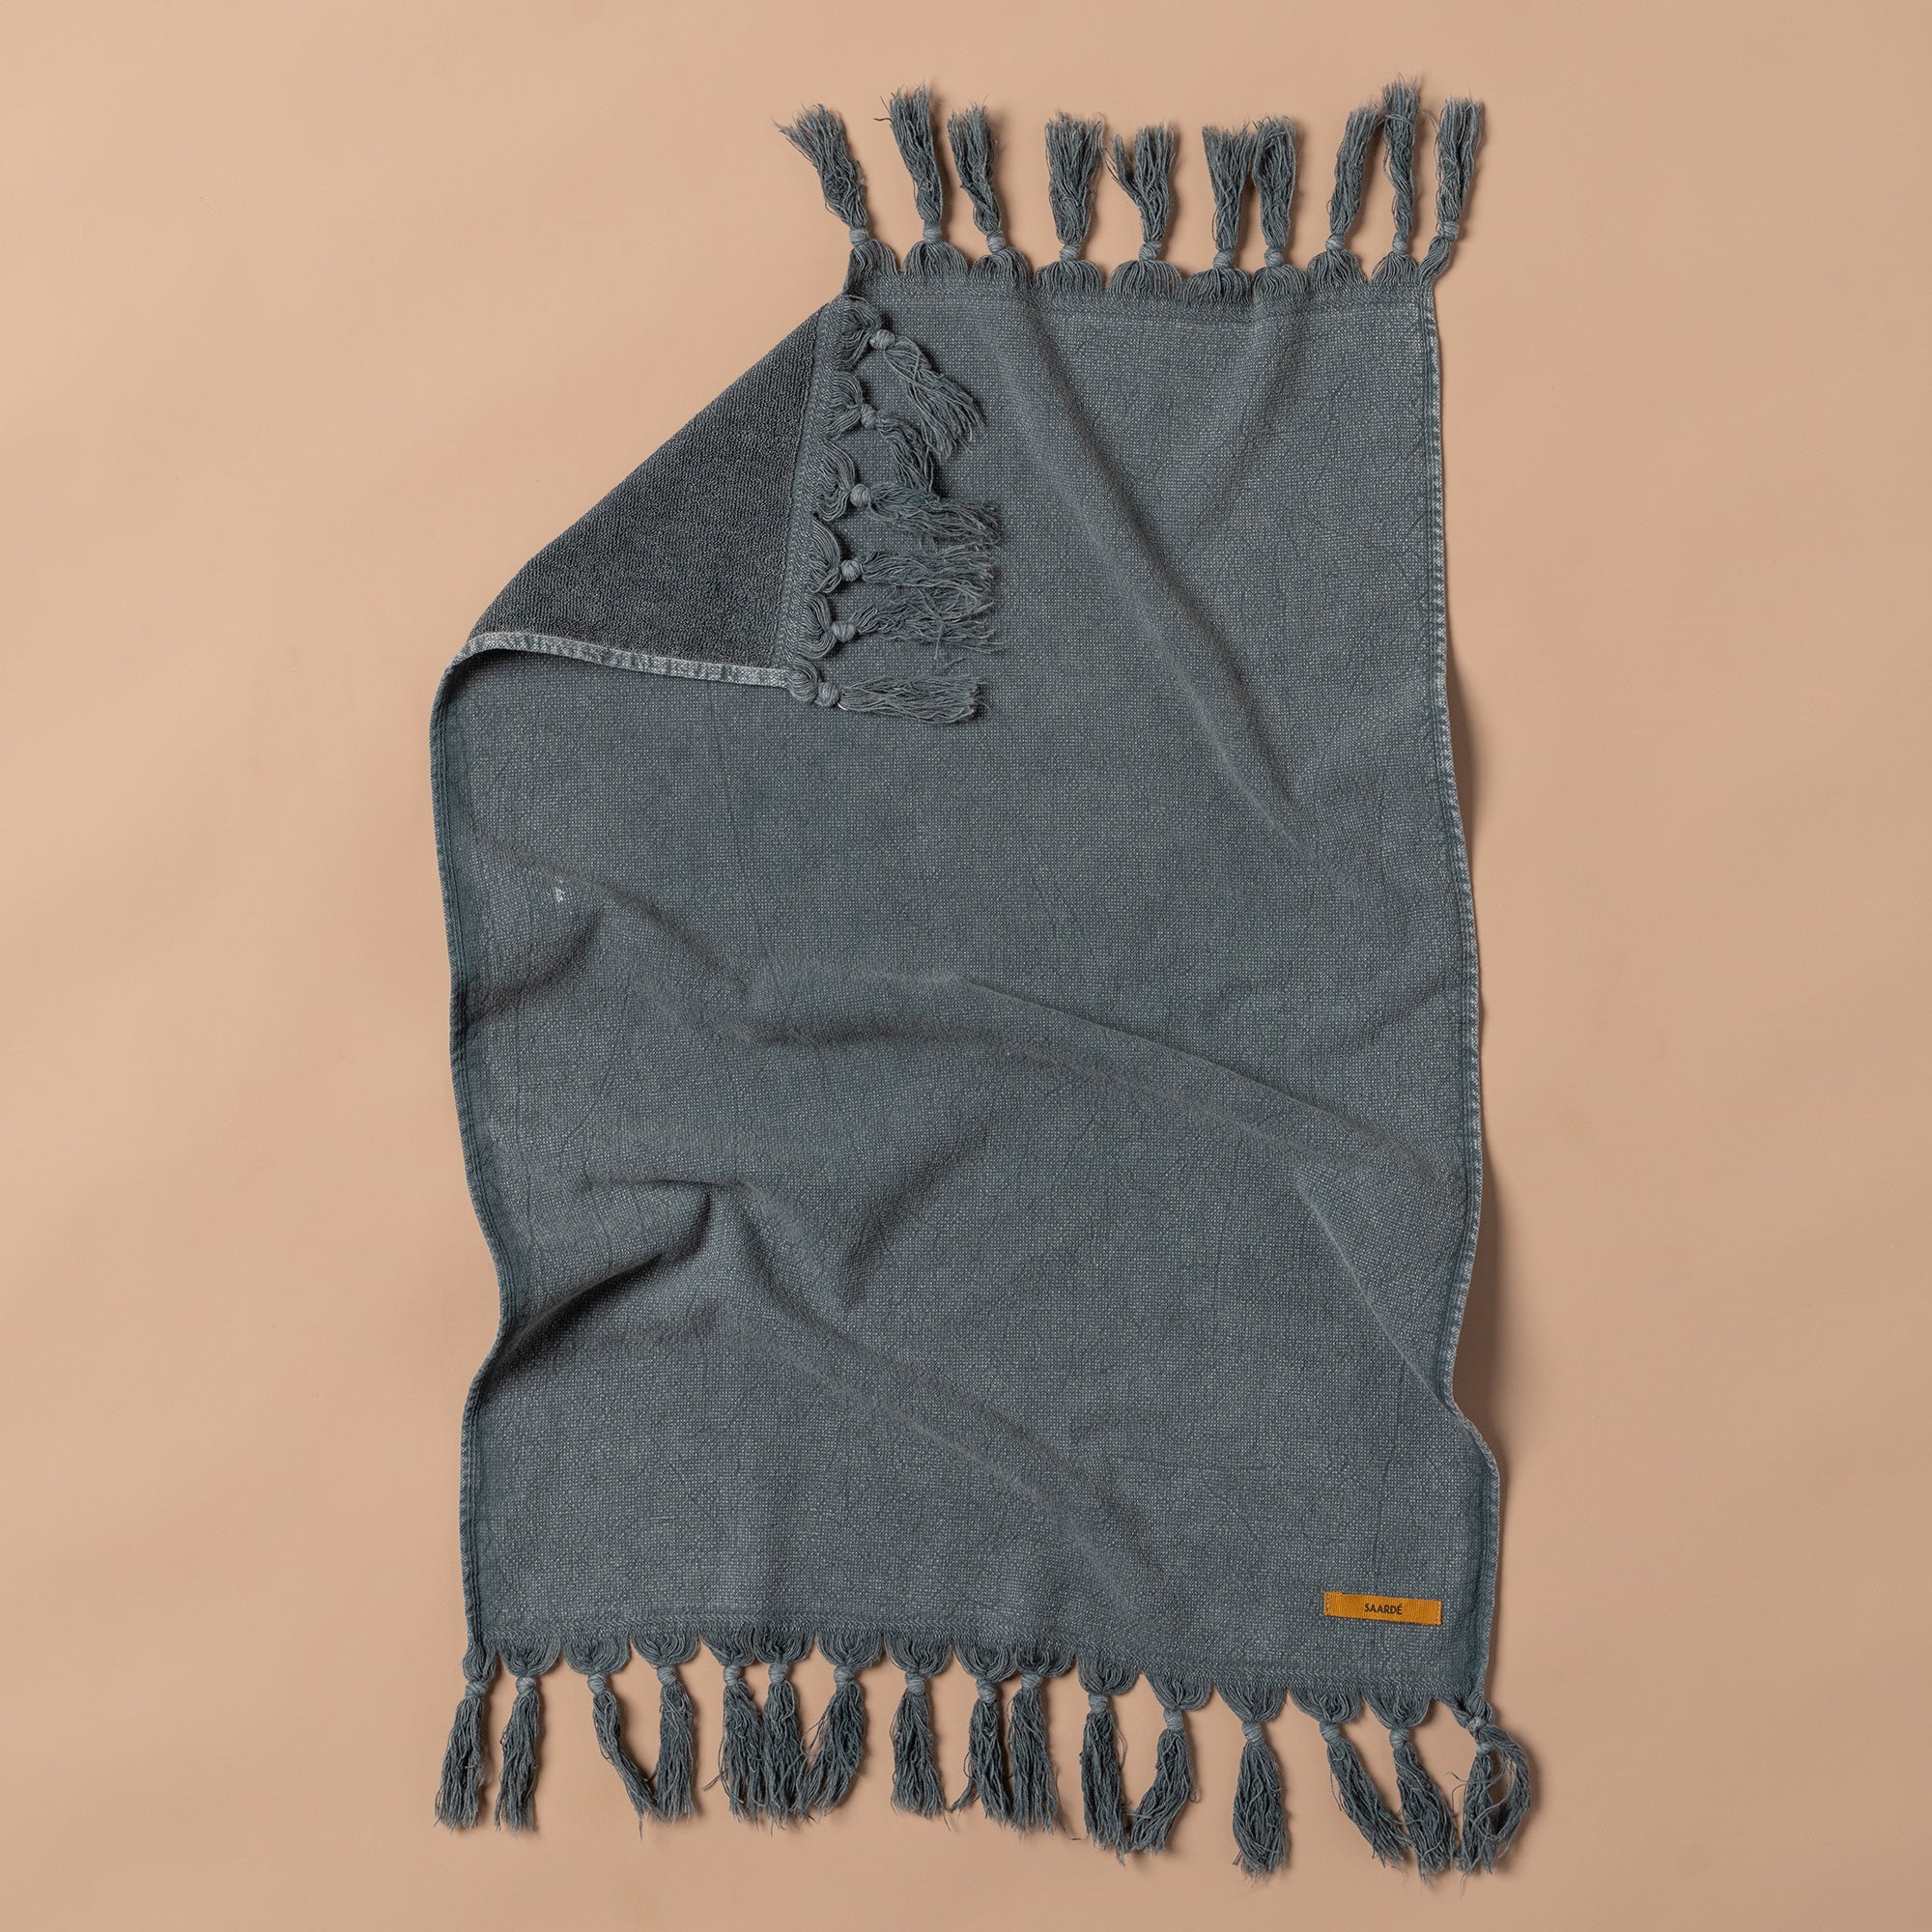 Vintage Wash Towel Collection | Charcoal - Hand Towel - Hand Towel - Saardé - Saardé.